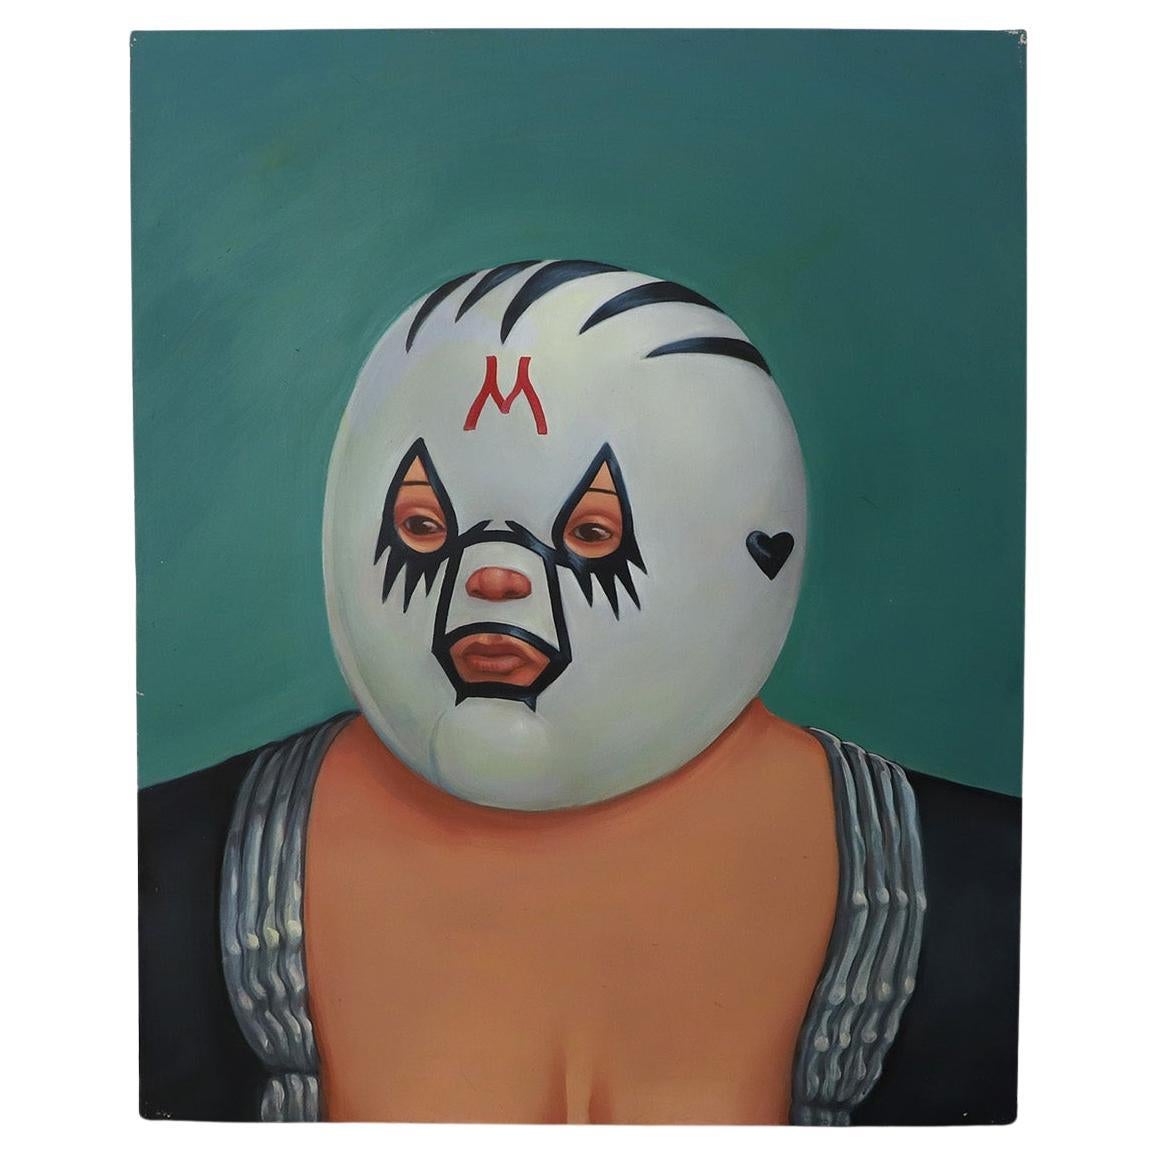 Mexican Wrestler painting